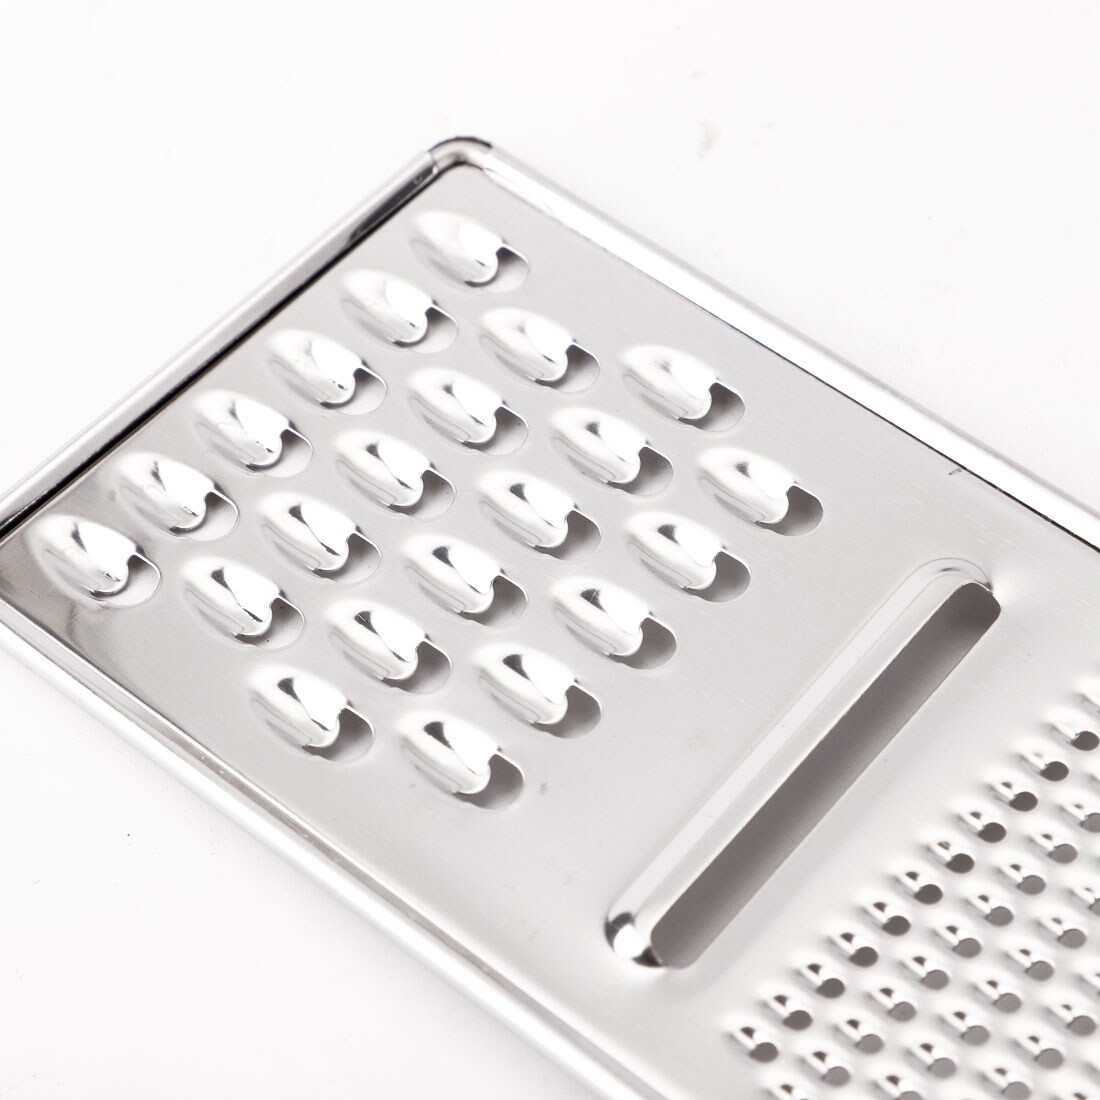 https://ak1.ostkcdn.com/images/products/is/images/direct/4d48f38ee0904710c544e72c5f2dfc4488c1d4a6/Kitchen-Restaurant-Metal-Cheese-Grater-Slicer-Peeler-Shredder-Tool-Silver-Tone.jpg